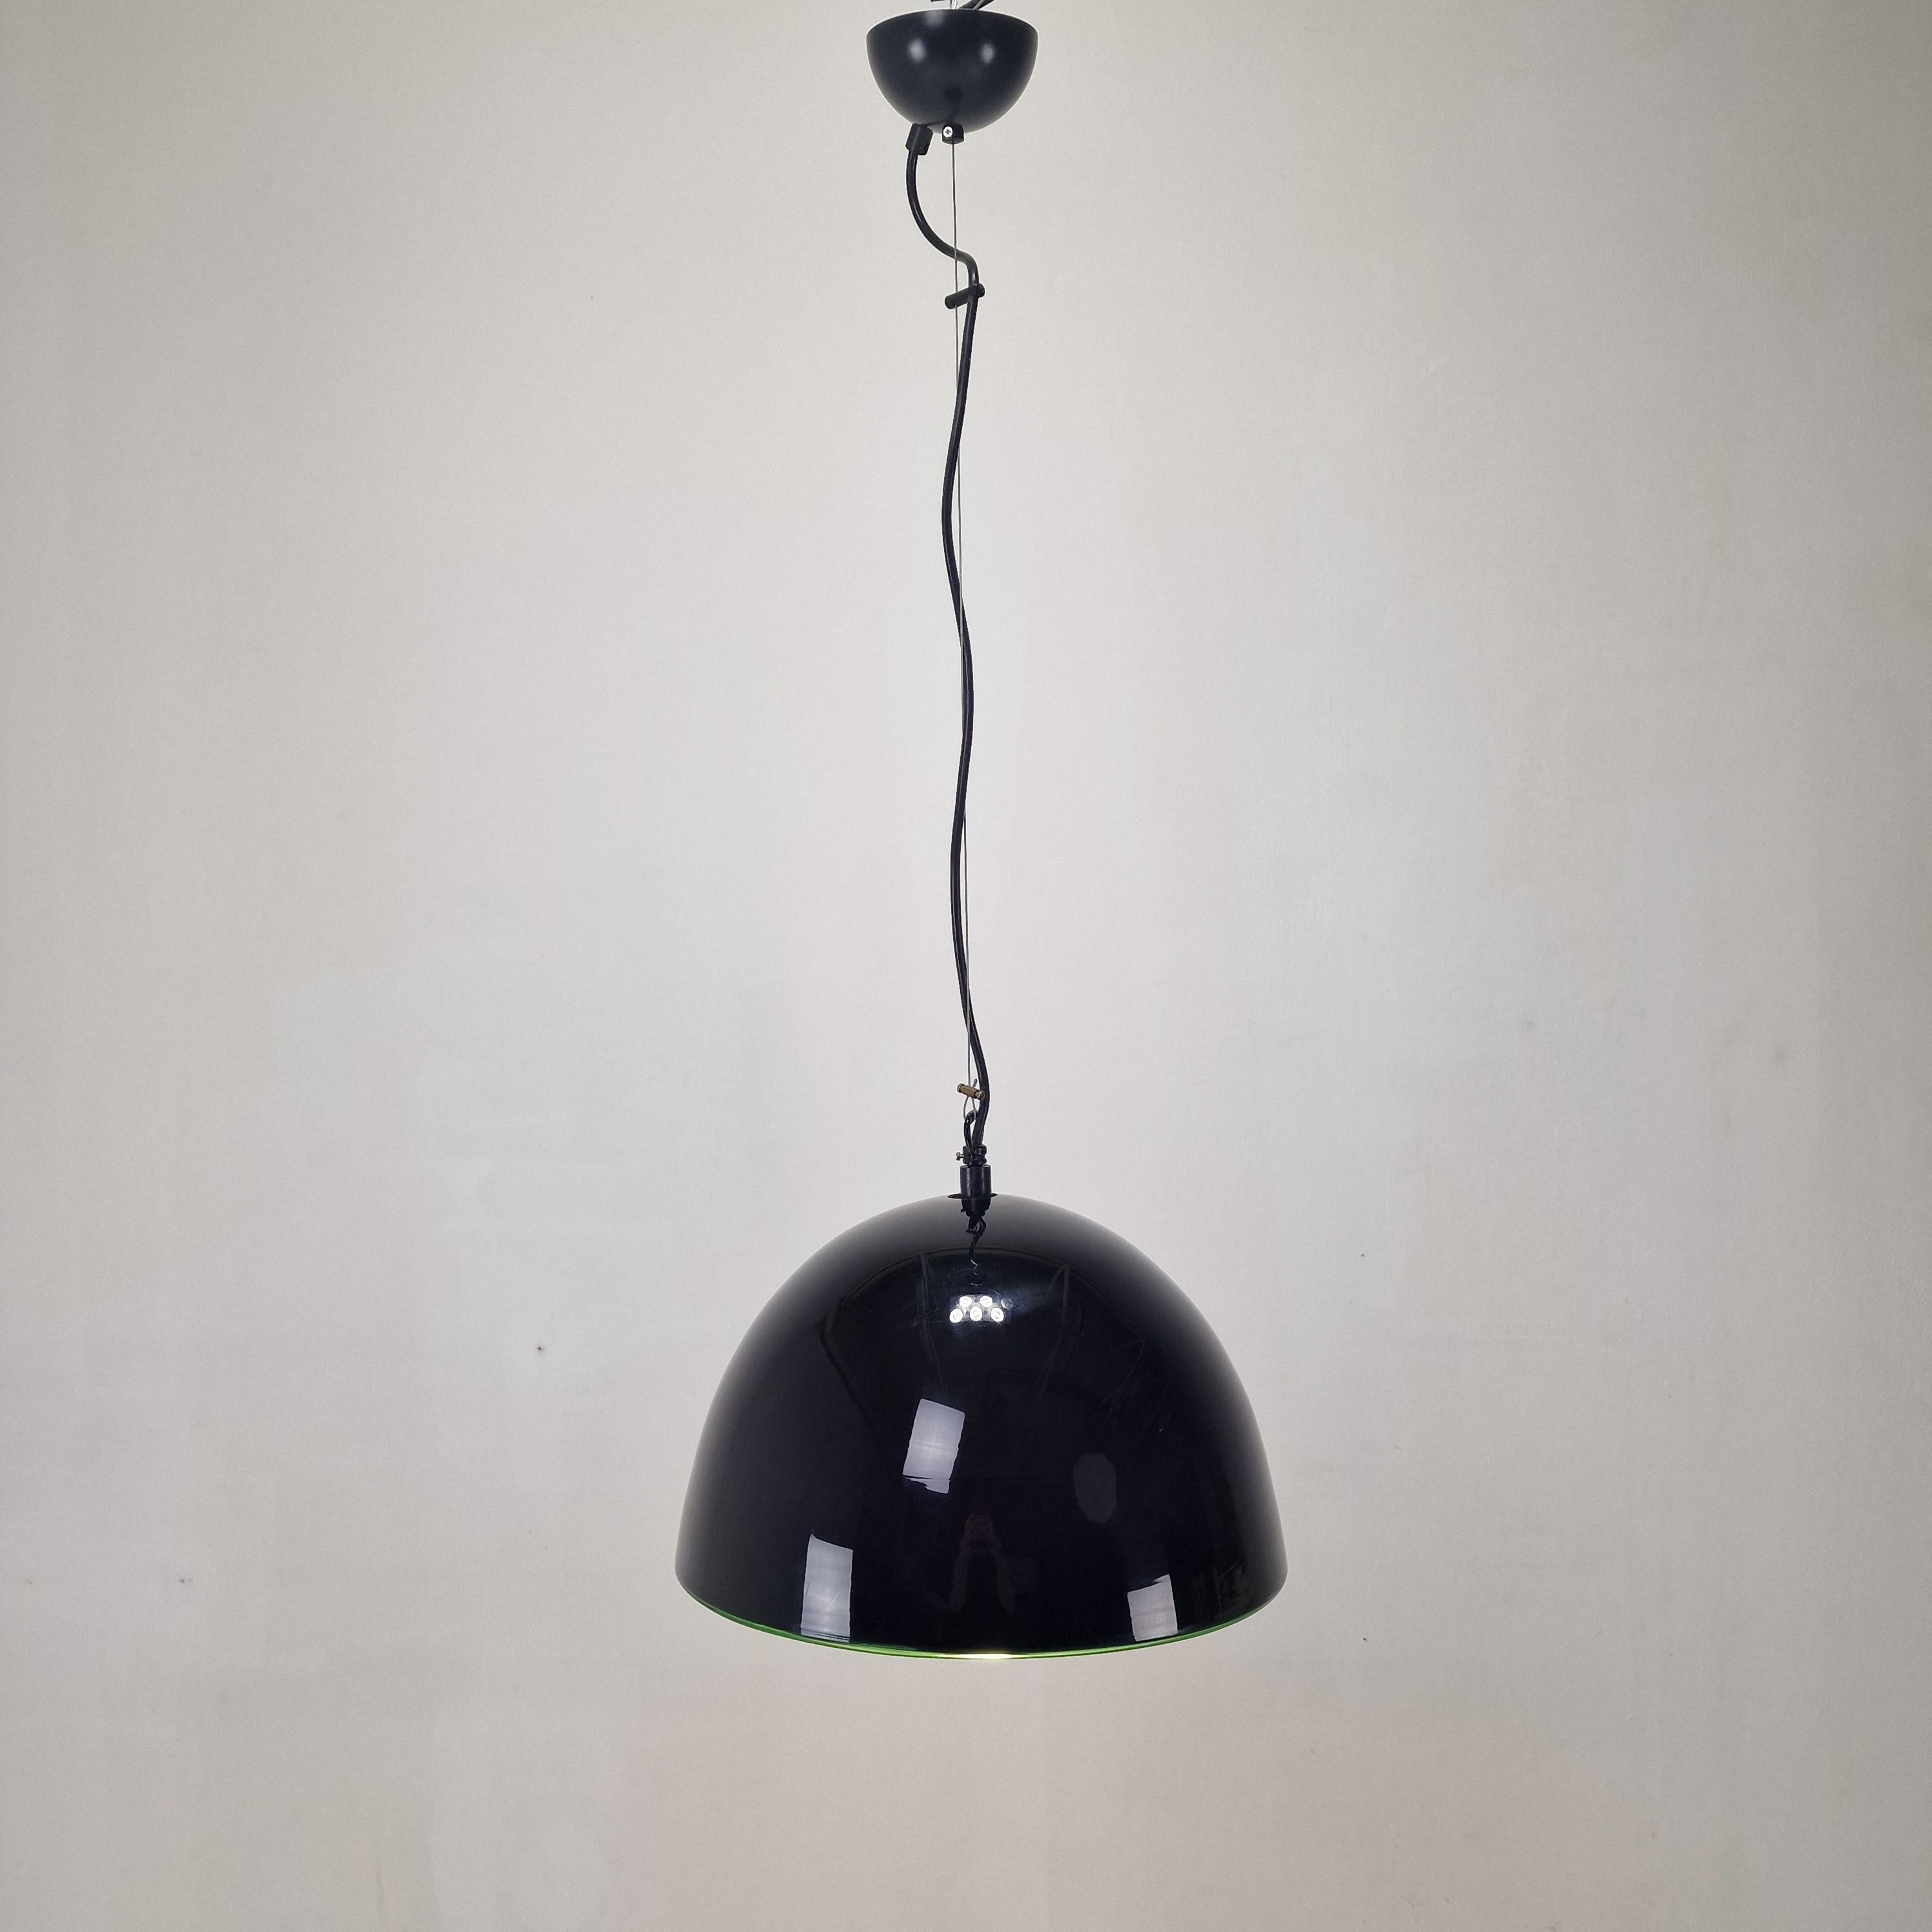 Exceptional and rare pendant designed by Gae Aulenti for Vistosi from the 